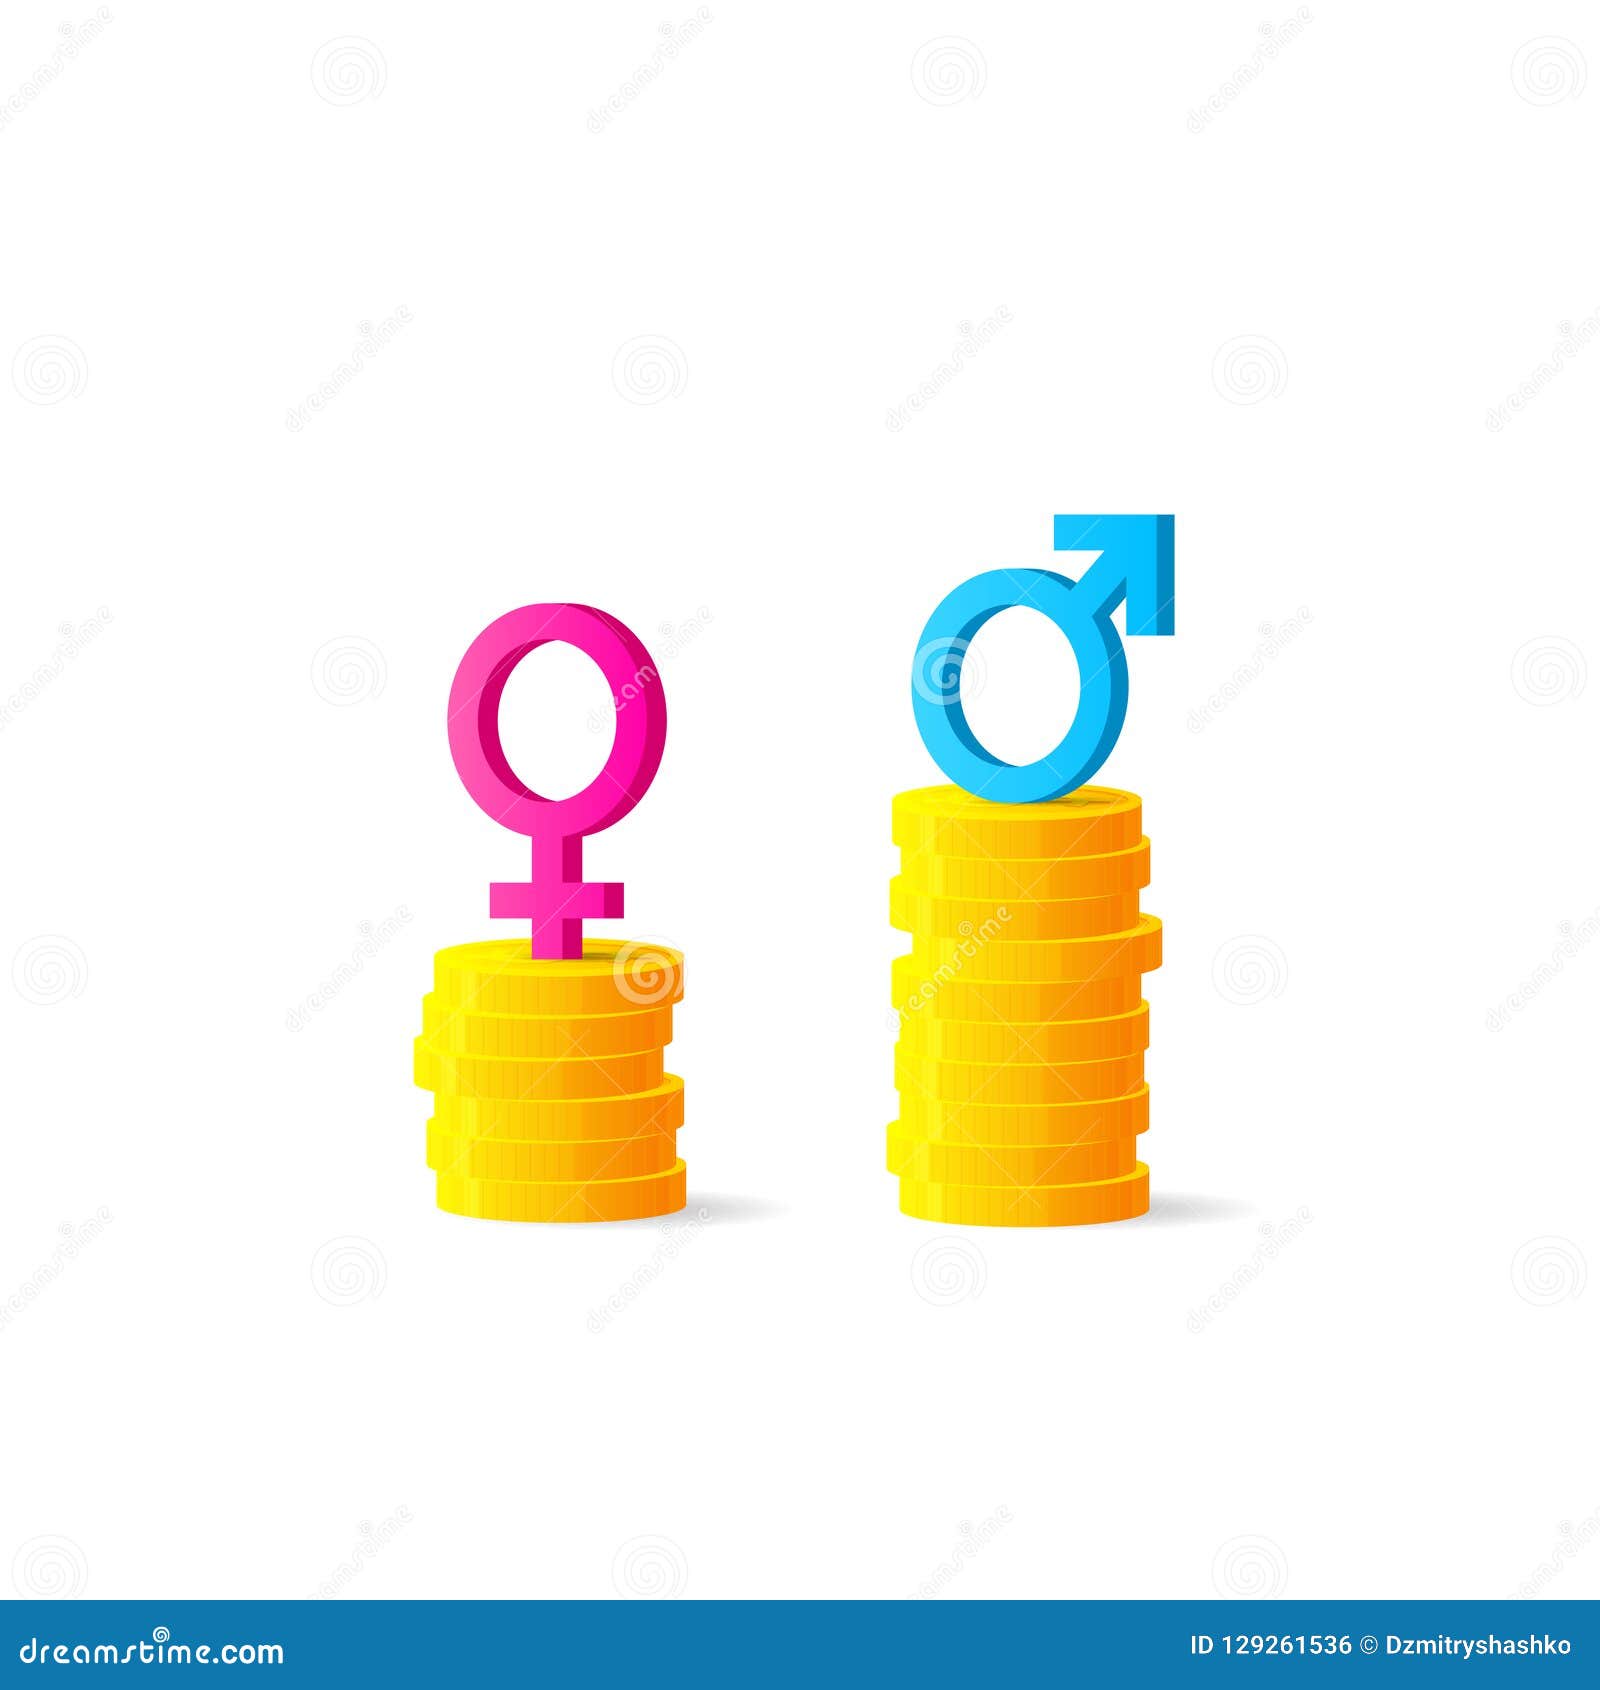 gender gap or unequal pay concept